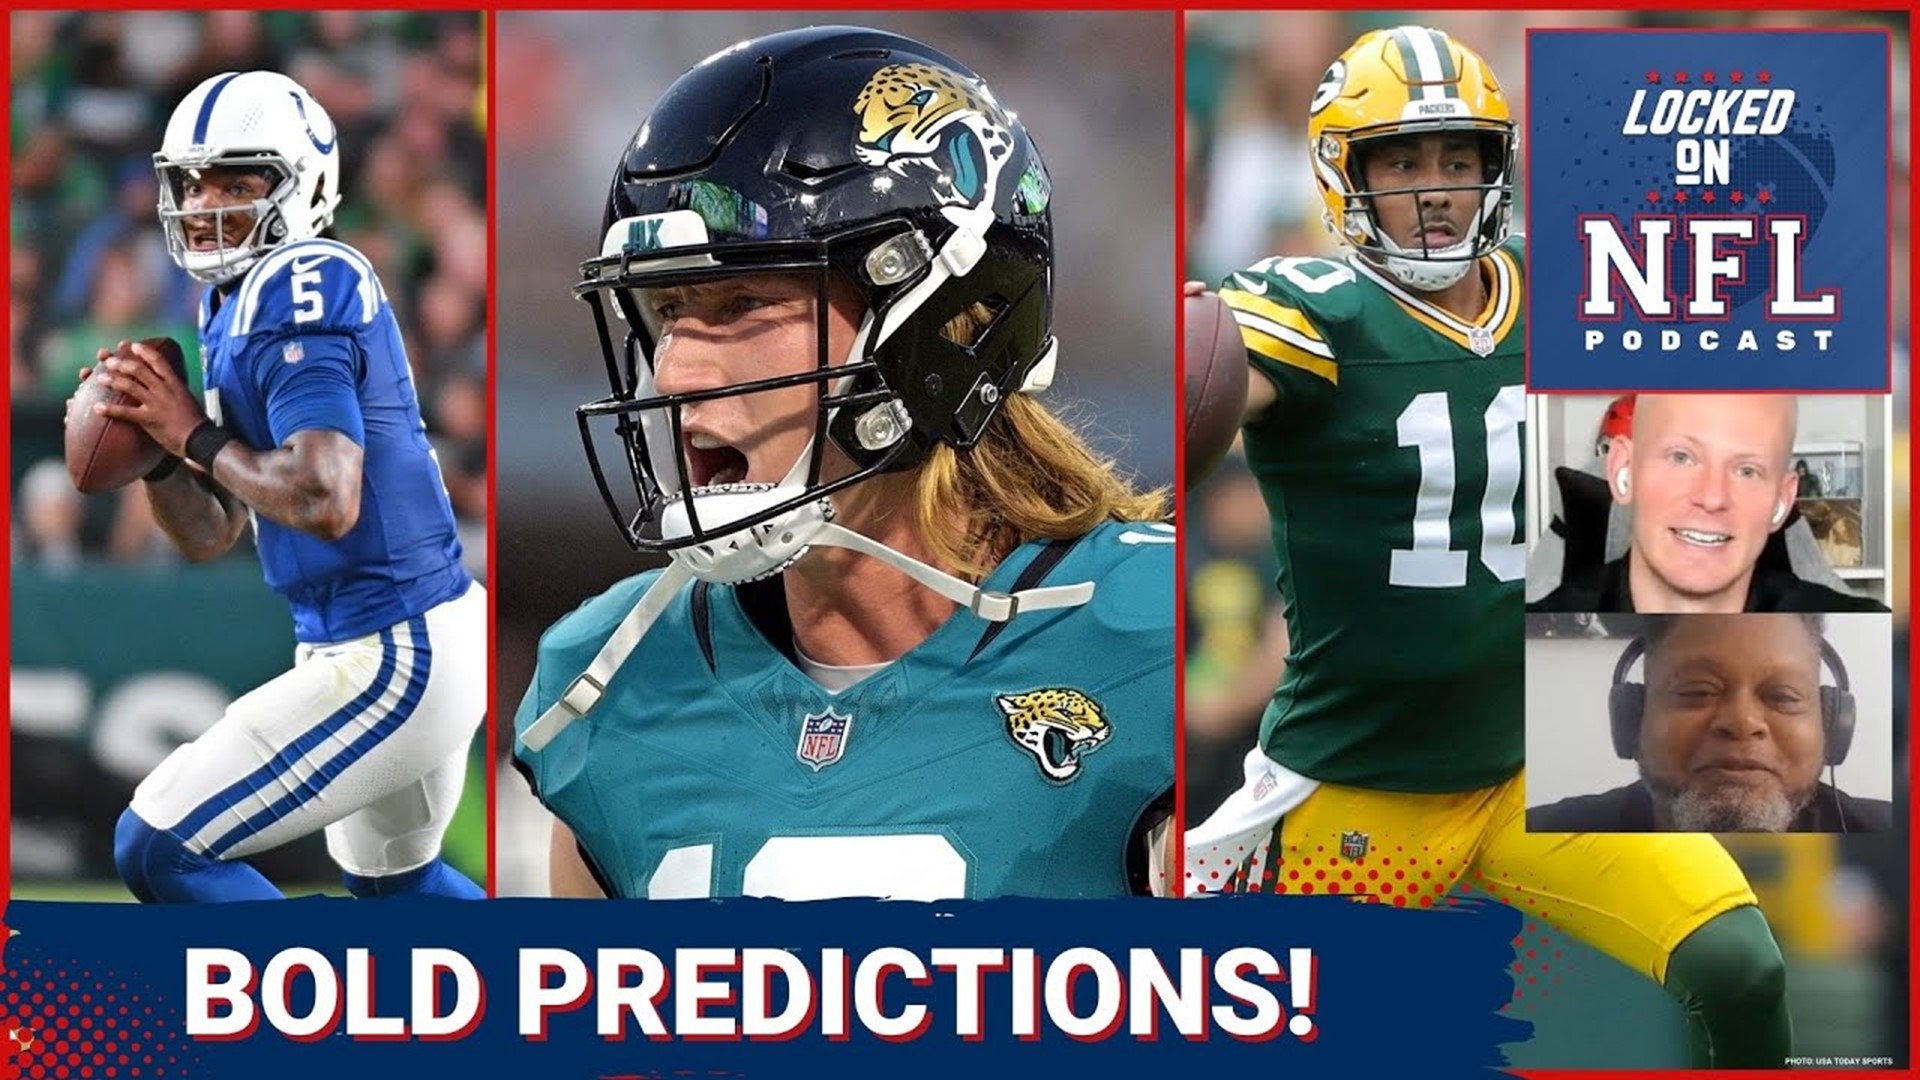 Bold predictions for 2023 NFL season: Aaron Rodgers better in NY?